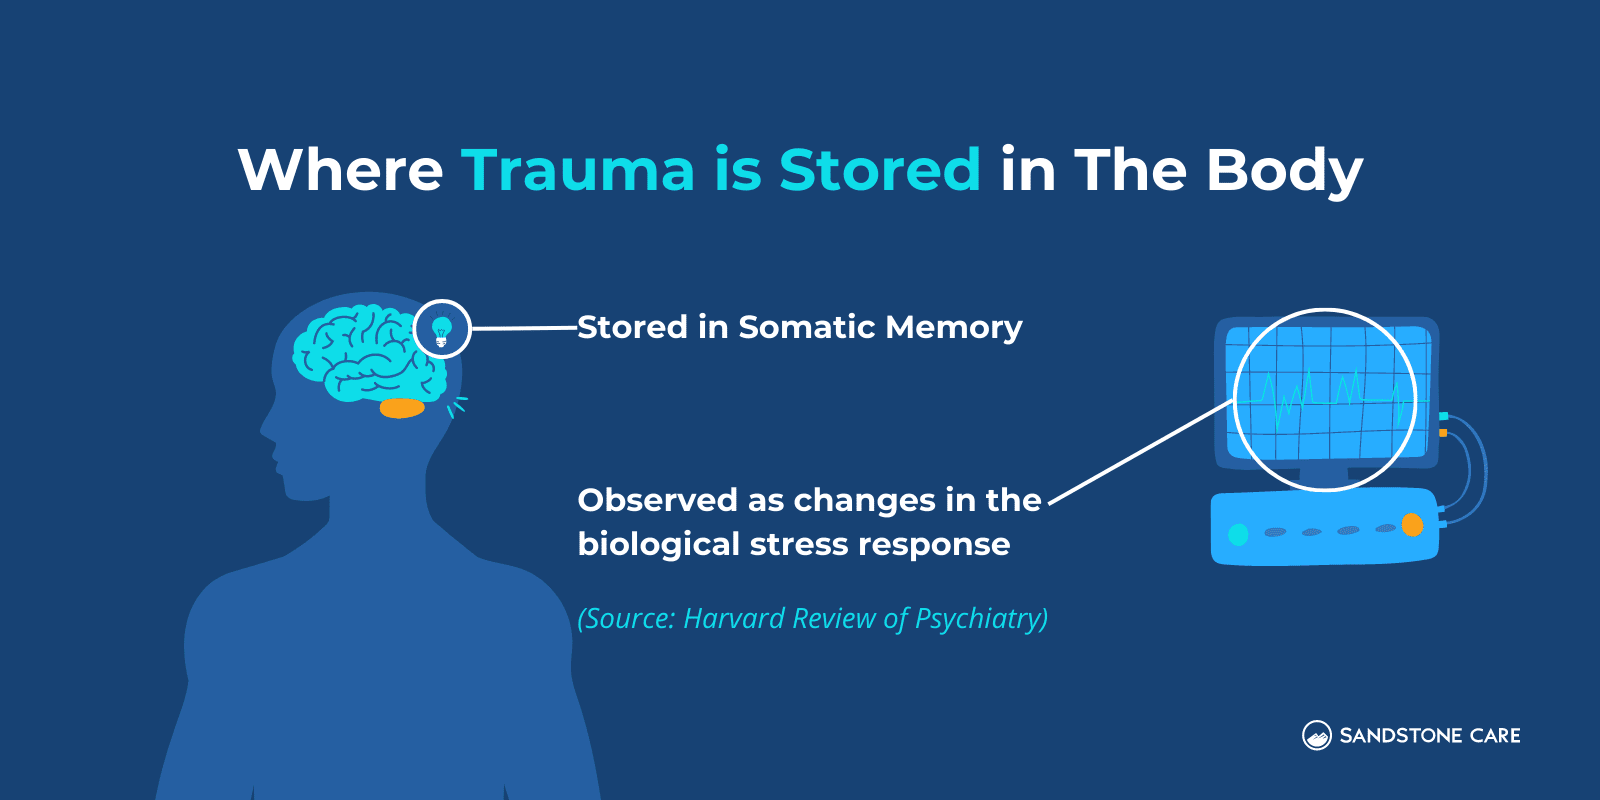 Where Trauma is stored in the body infographic